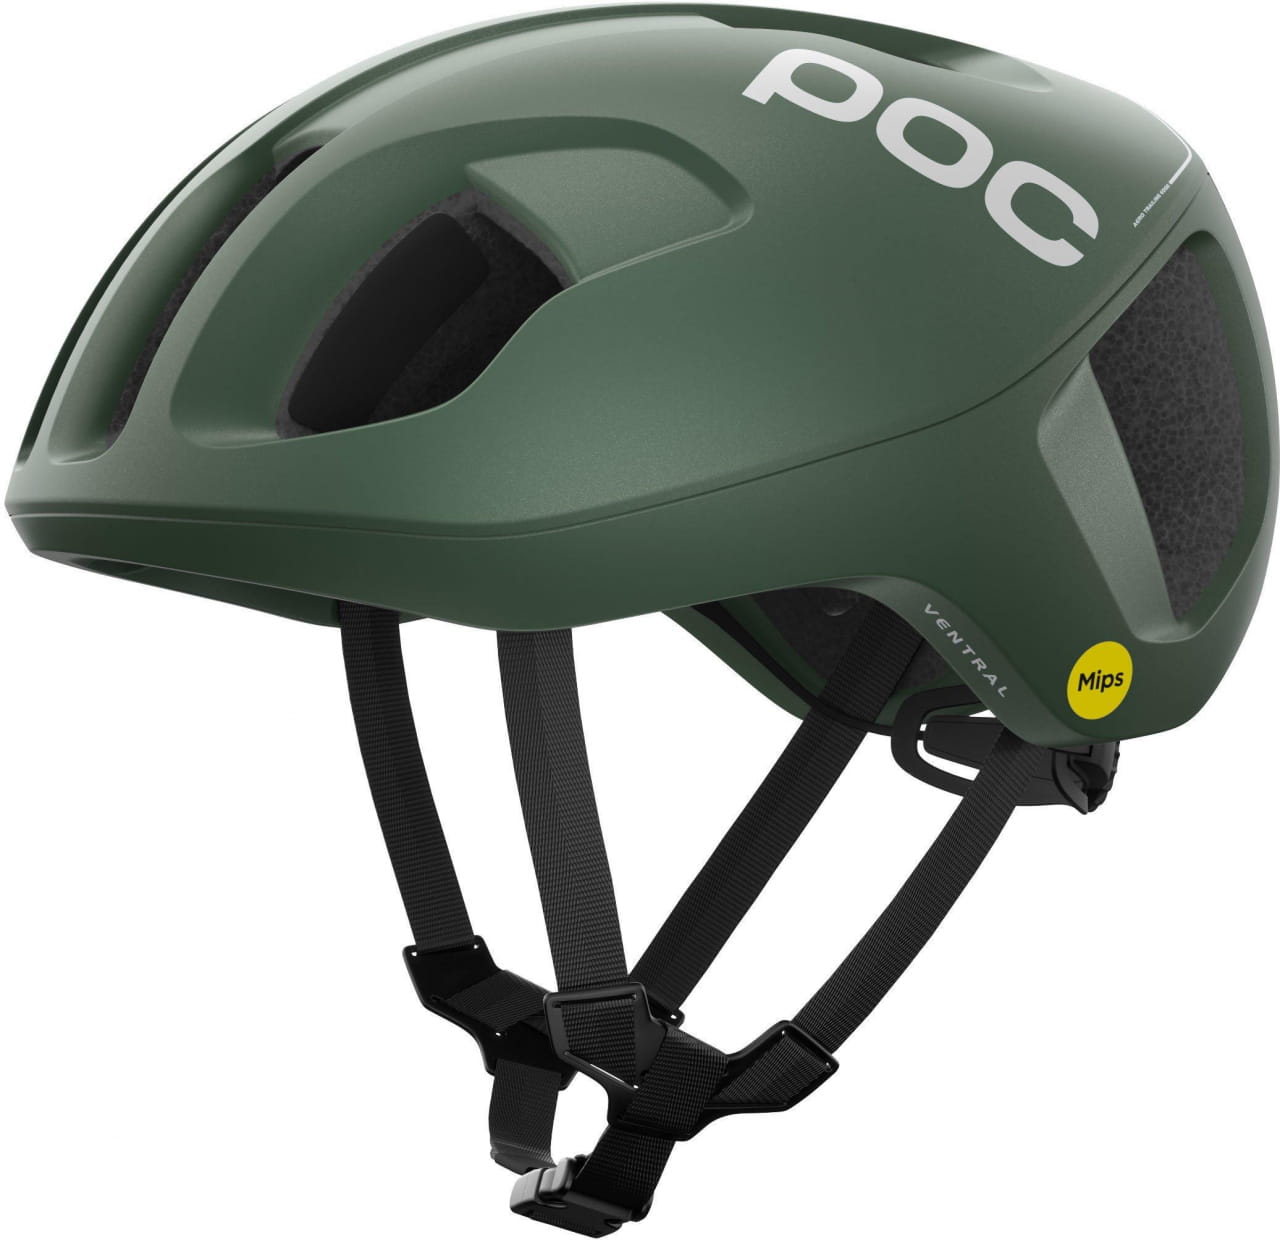 Kask rowerowy unisex POC Ventral MIPS